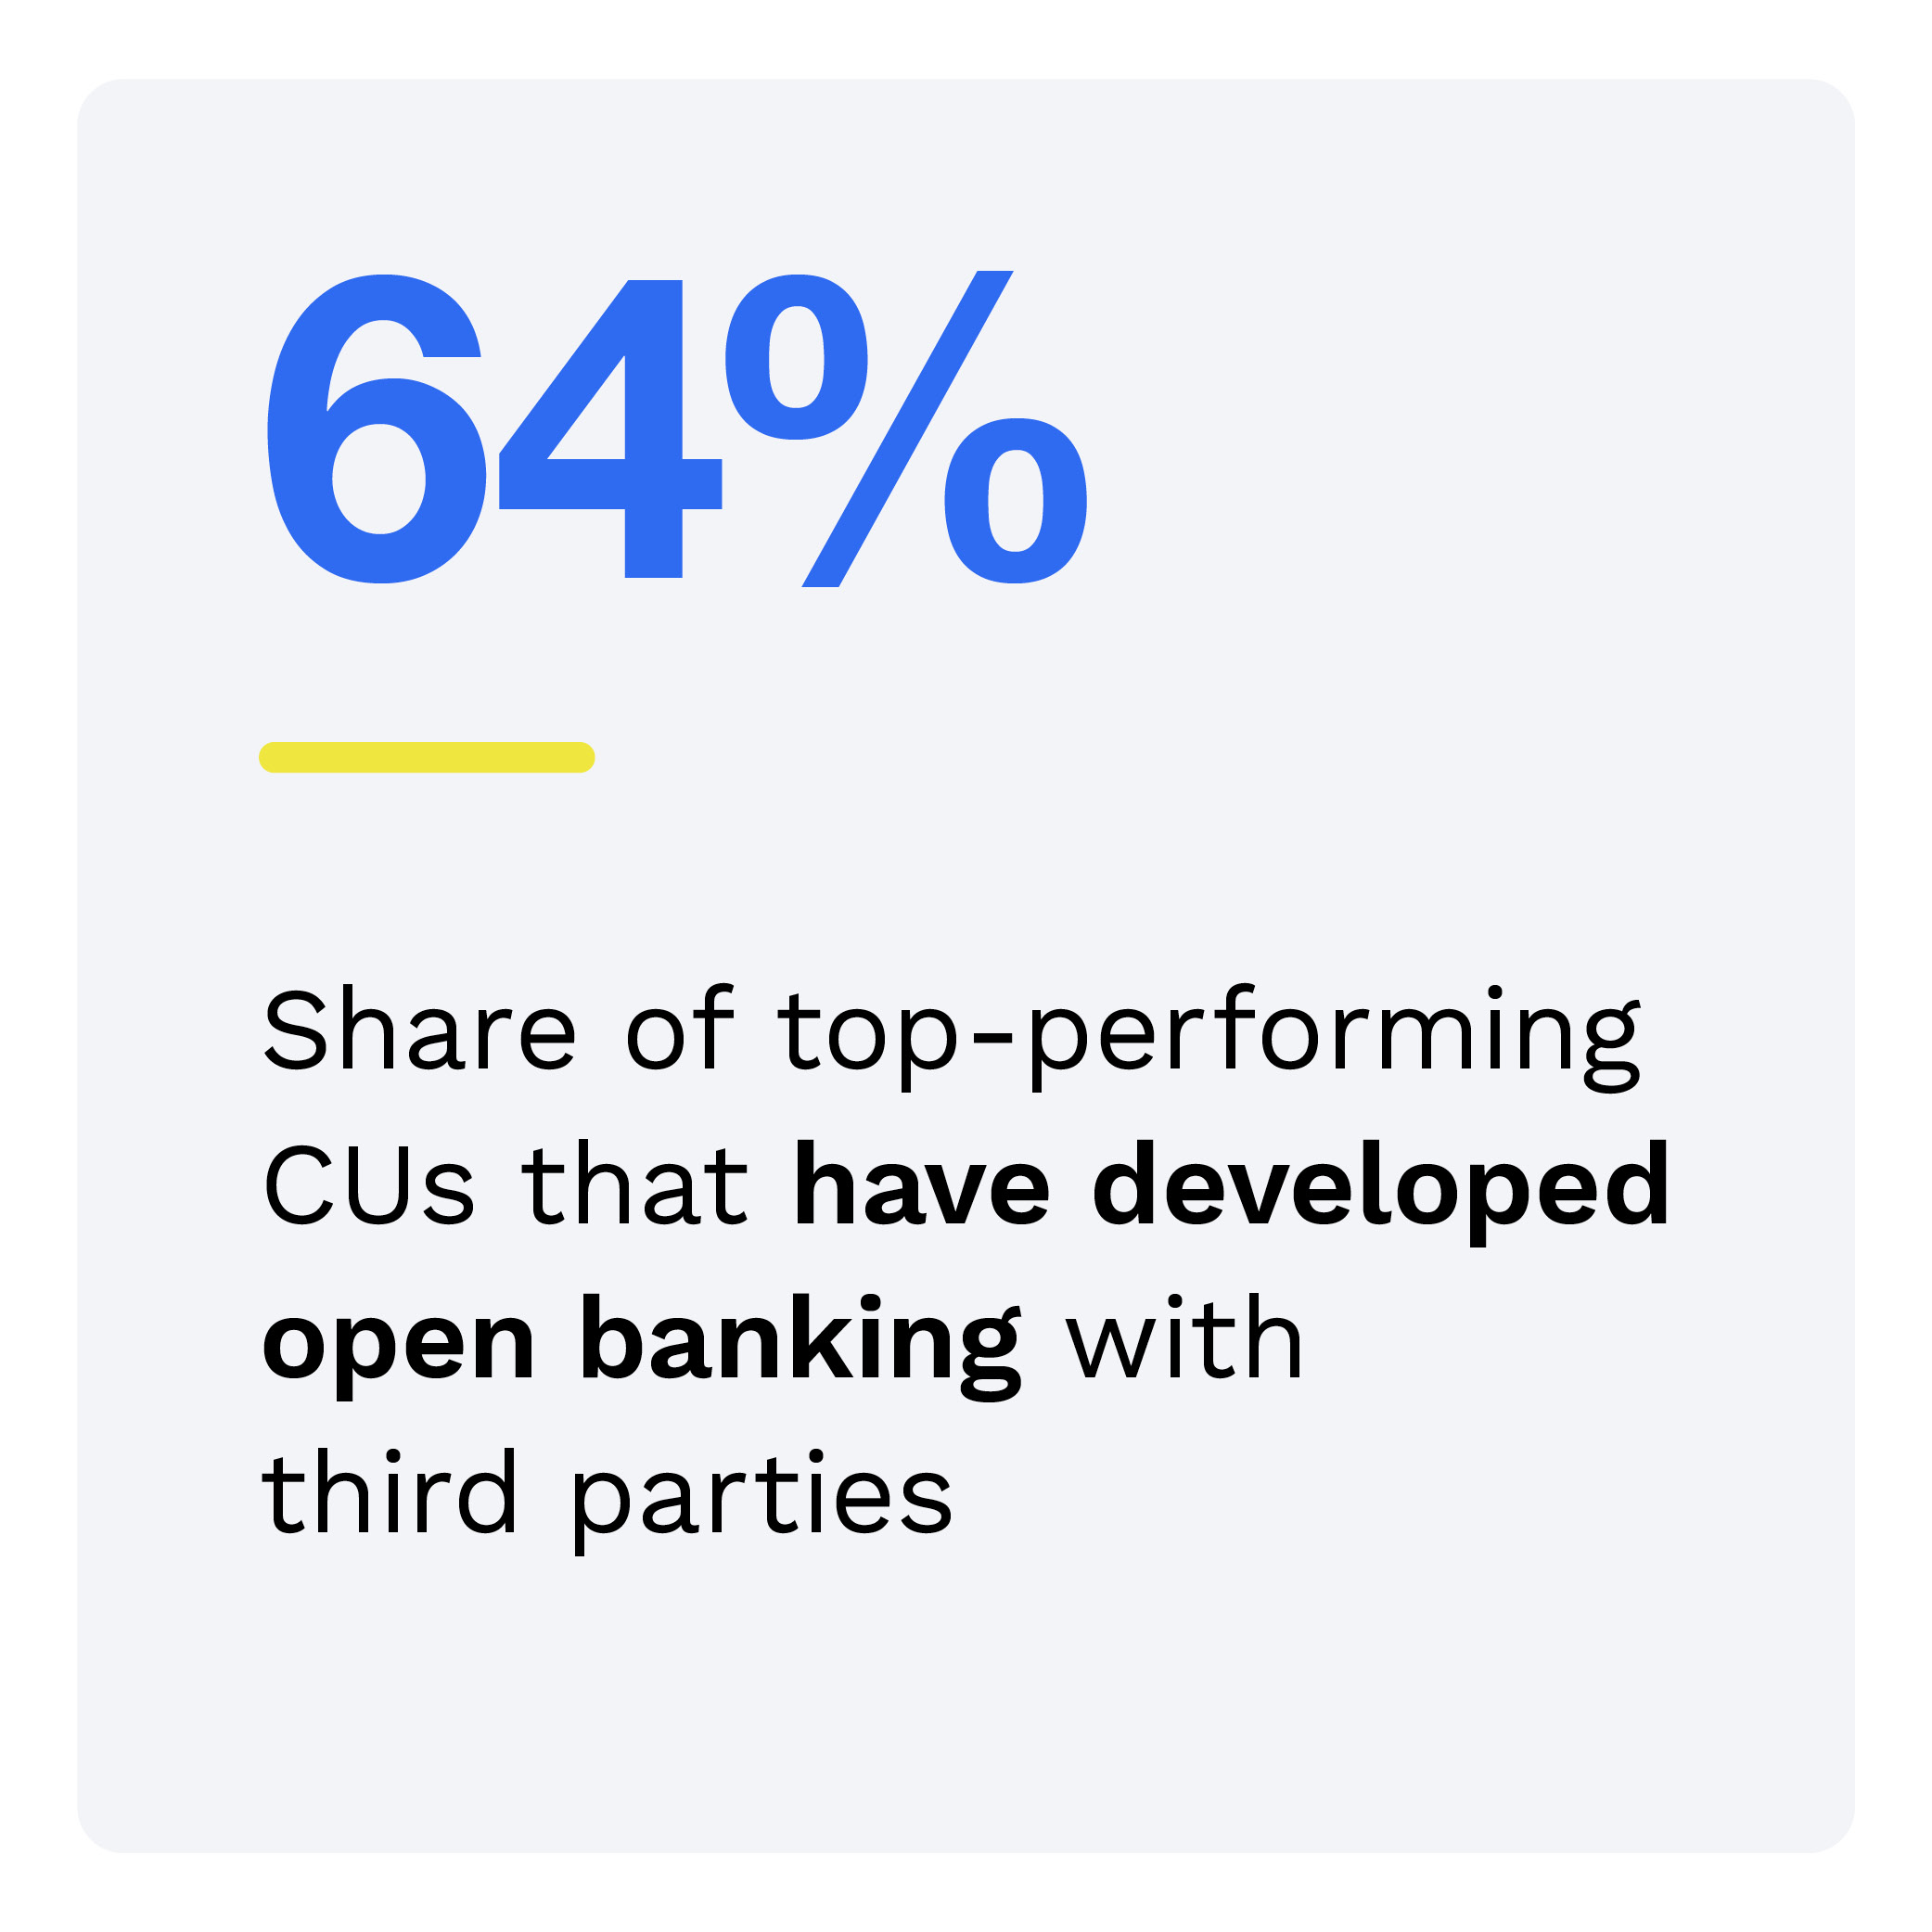 64%: Share of top-performing CUs that have developed open banking with third parties